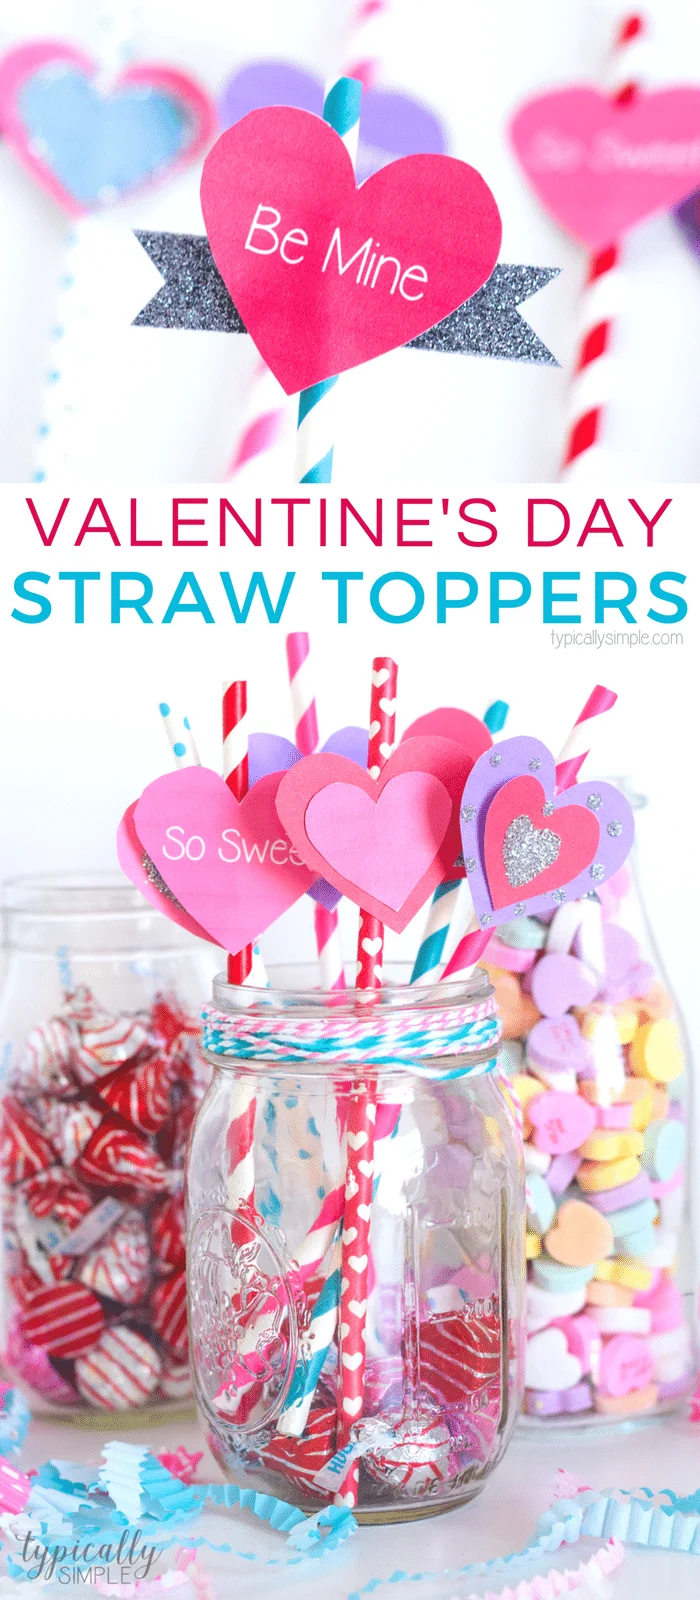 https://typicallysimple.com/wp-content/uploads/2018/01/Valentines-Day-Straw-Toppers-1-700x1600.png.webp